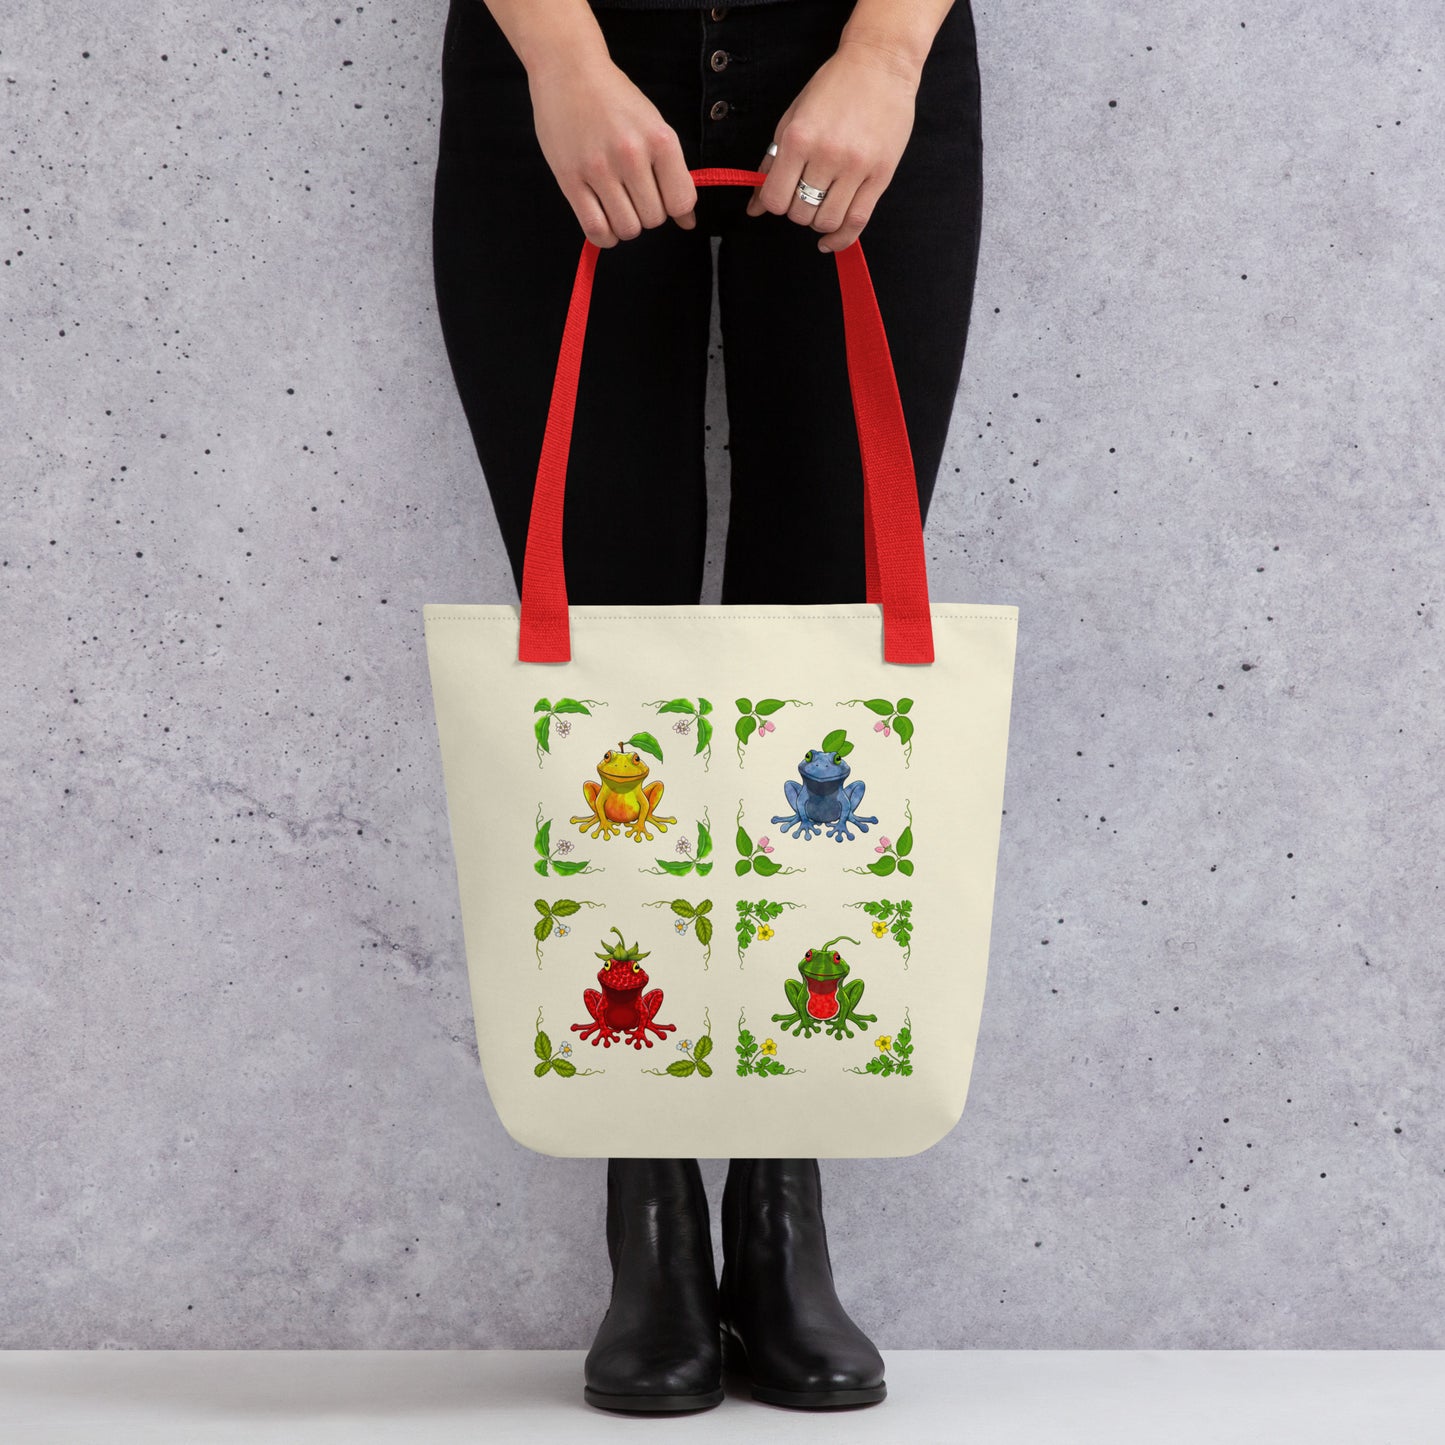 Stormseye design fruit frogs large tote bag modelled view